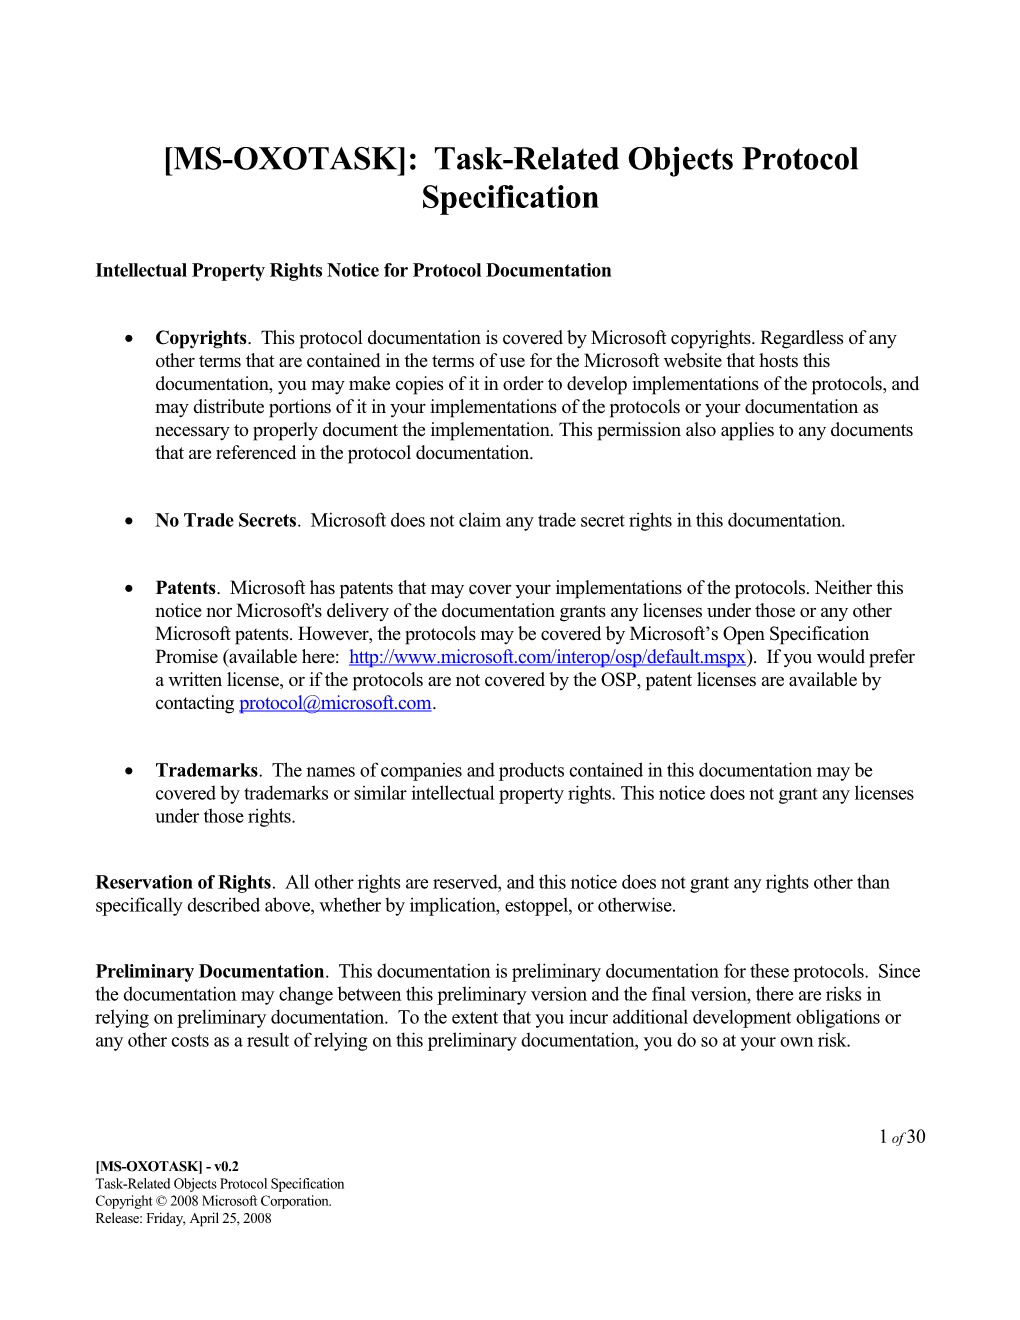 MS-OXOTASK : Task-Related Objects Protocol Specification